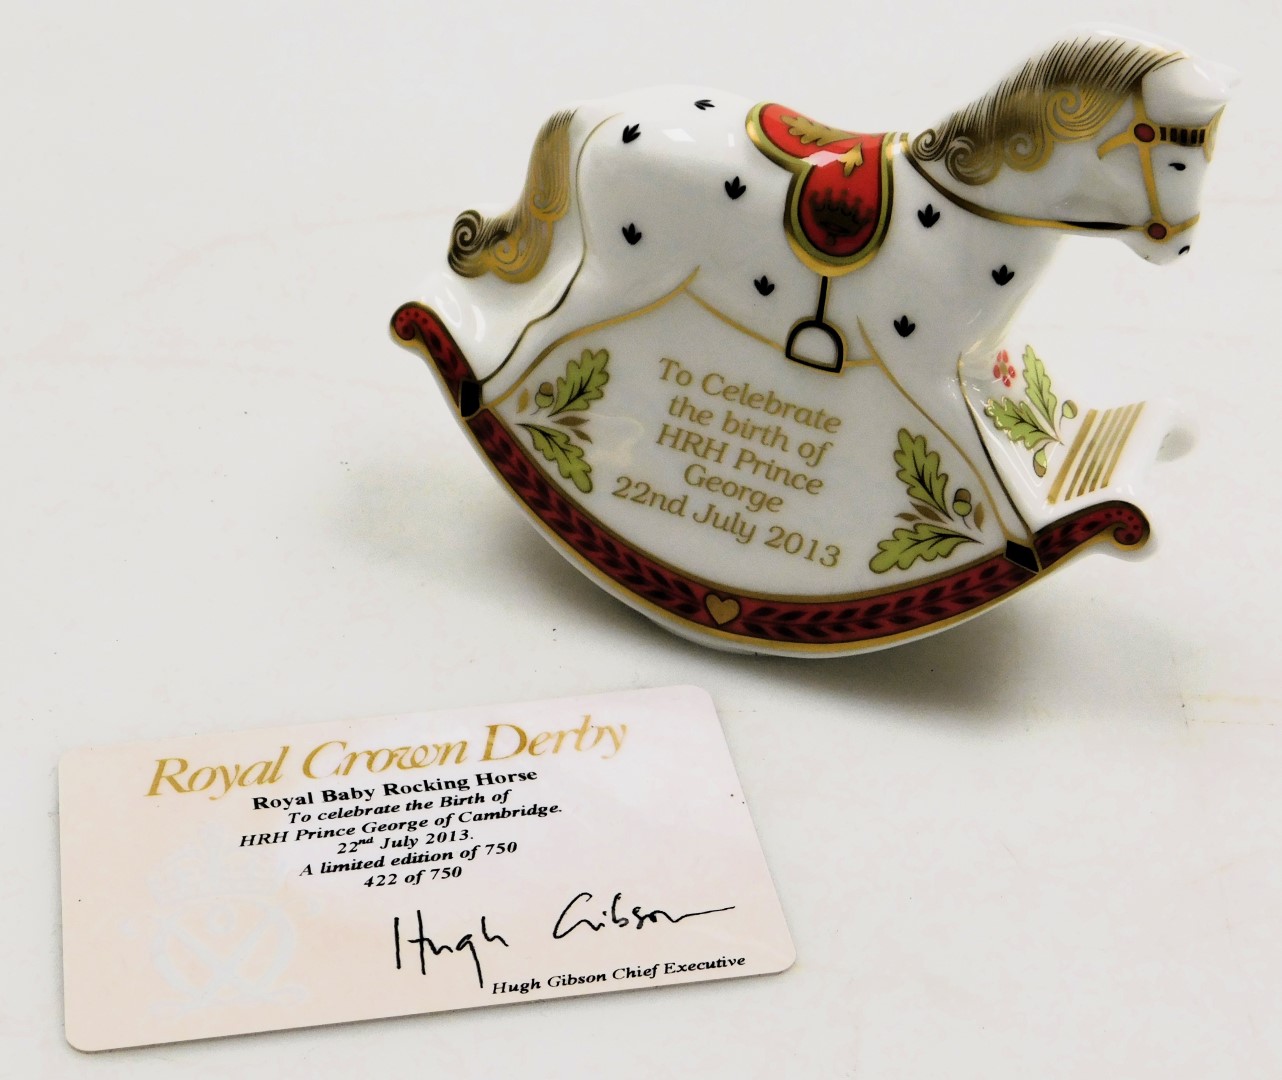 A Royal Crown Derby Royal Baby Rocking Horse, to celebrate the birth of His Royal Highness Prince Ge - Image 2 of 5